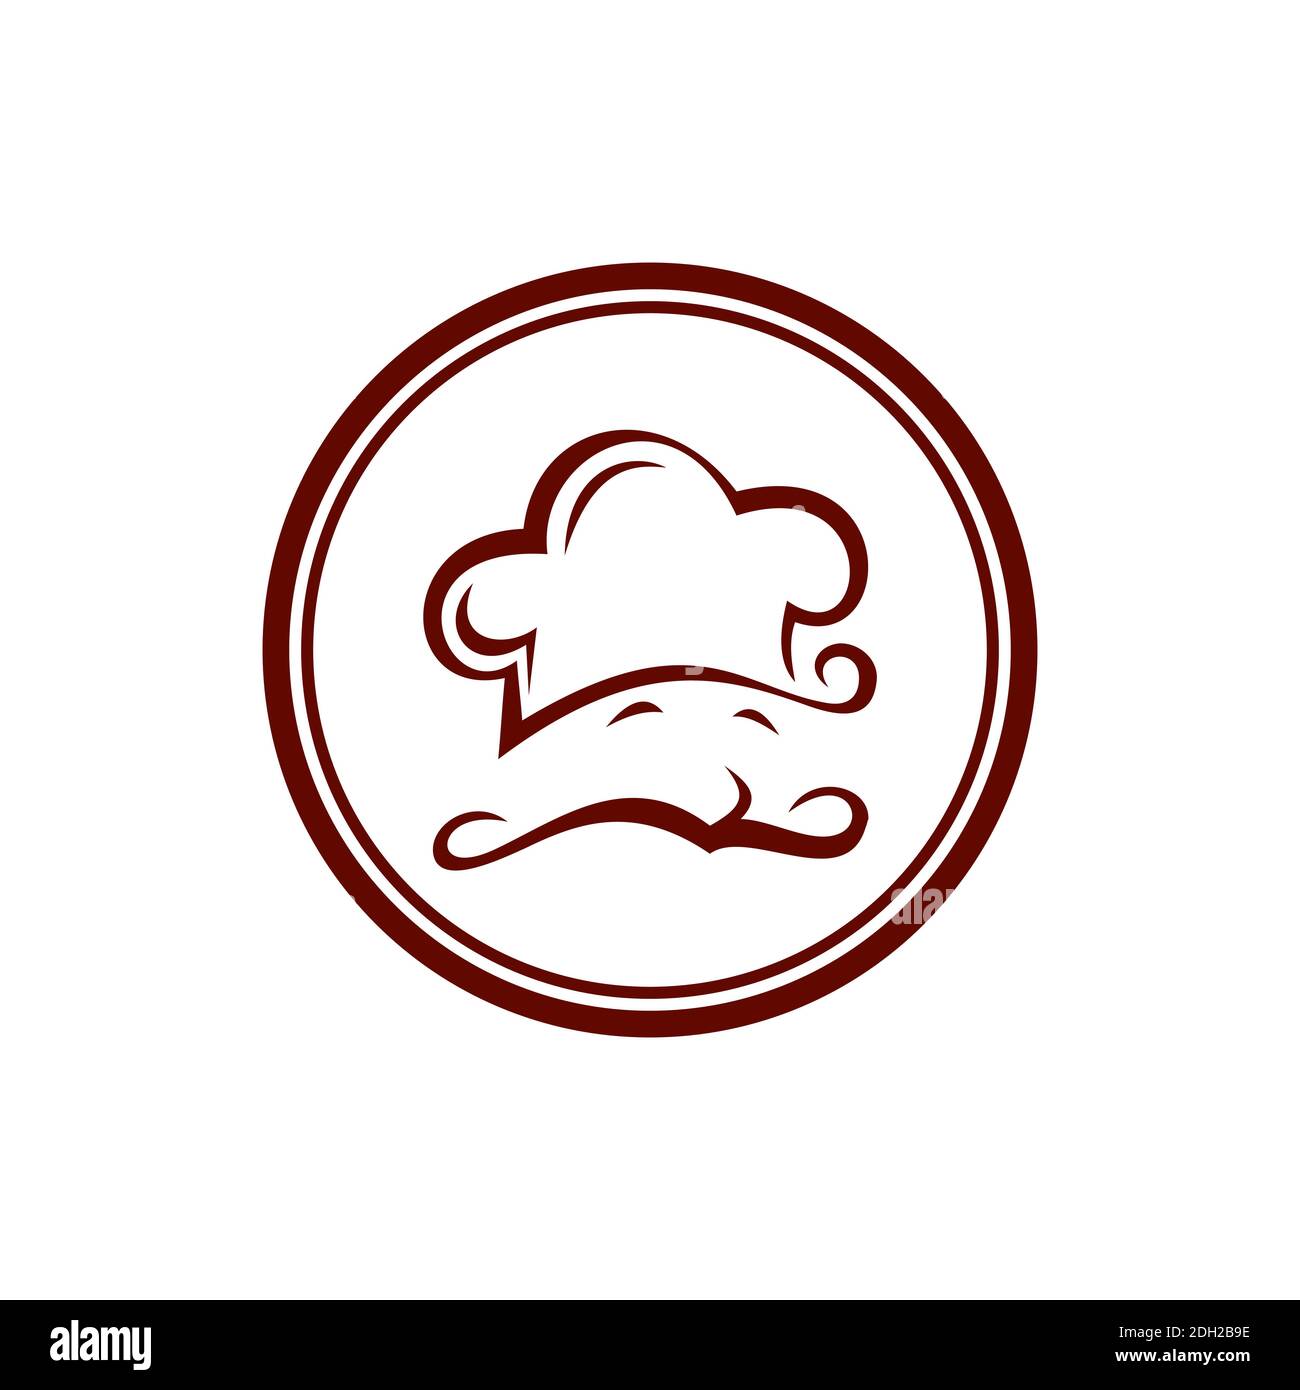 abstract chef kitchener cooky vector concept logo icon design Stock Vector